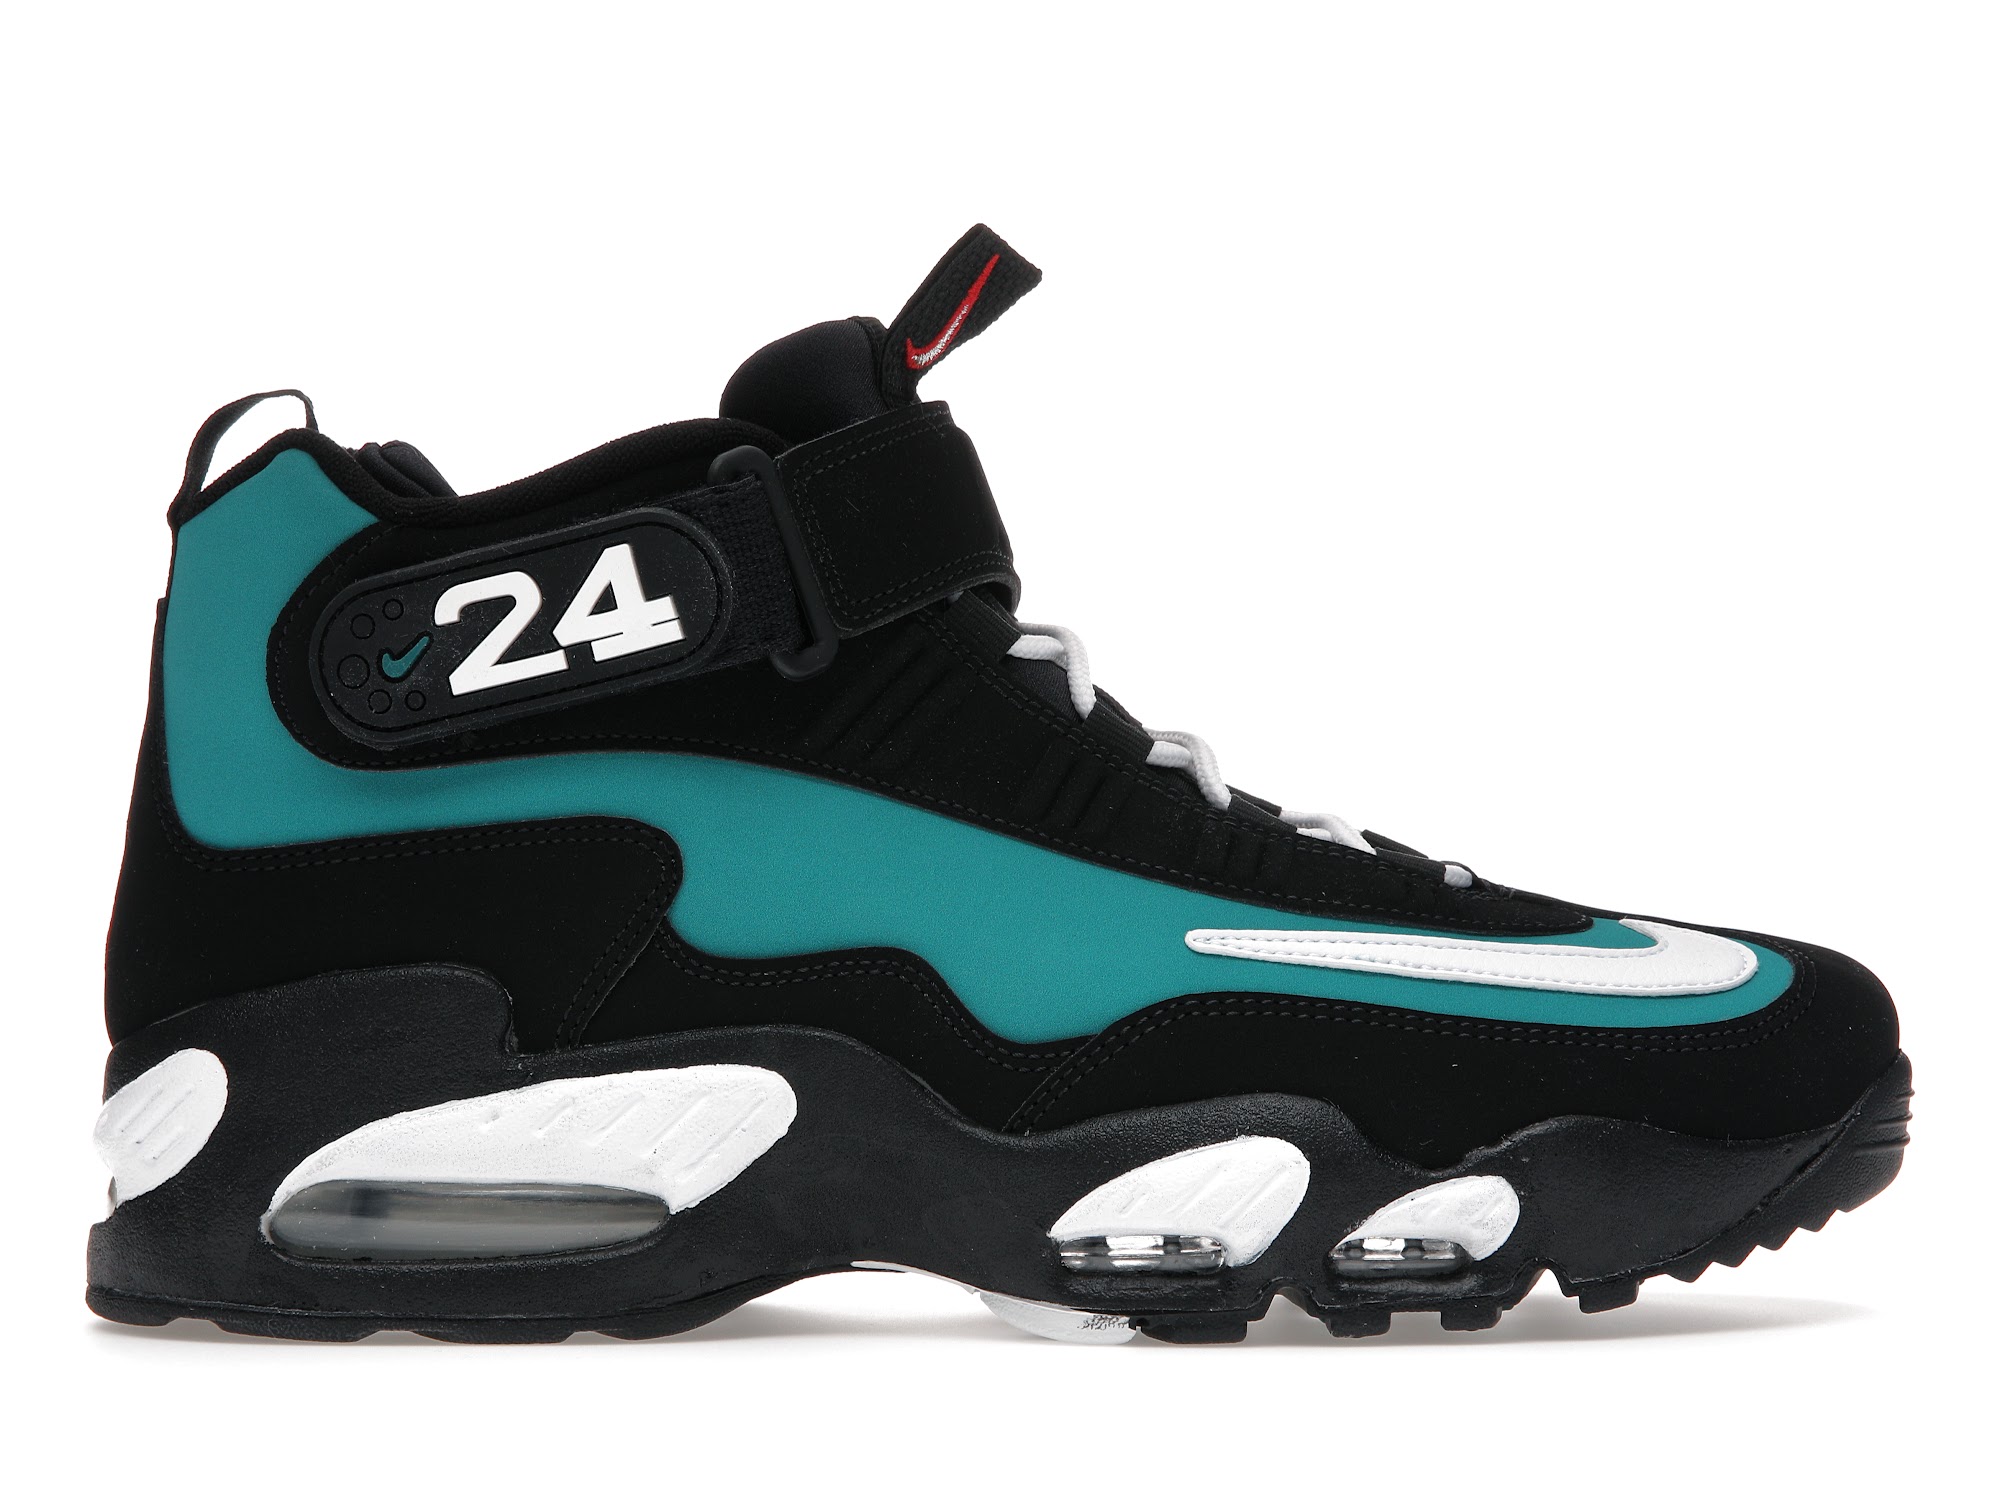 Ken Griffey Jr.'s sneakers inspired a generation - Sports Illustrated